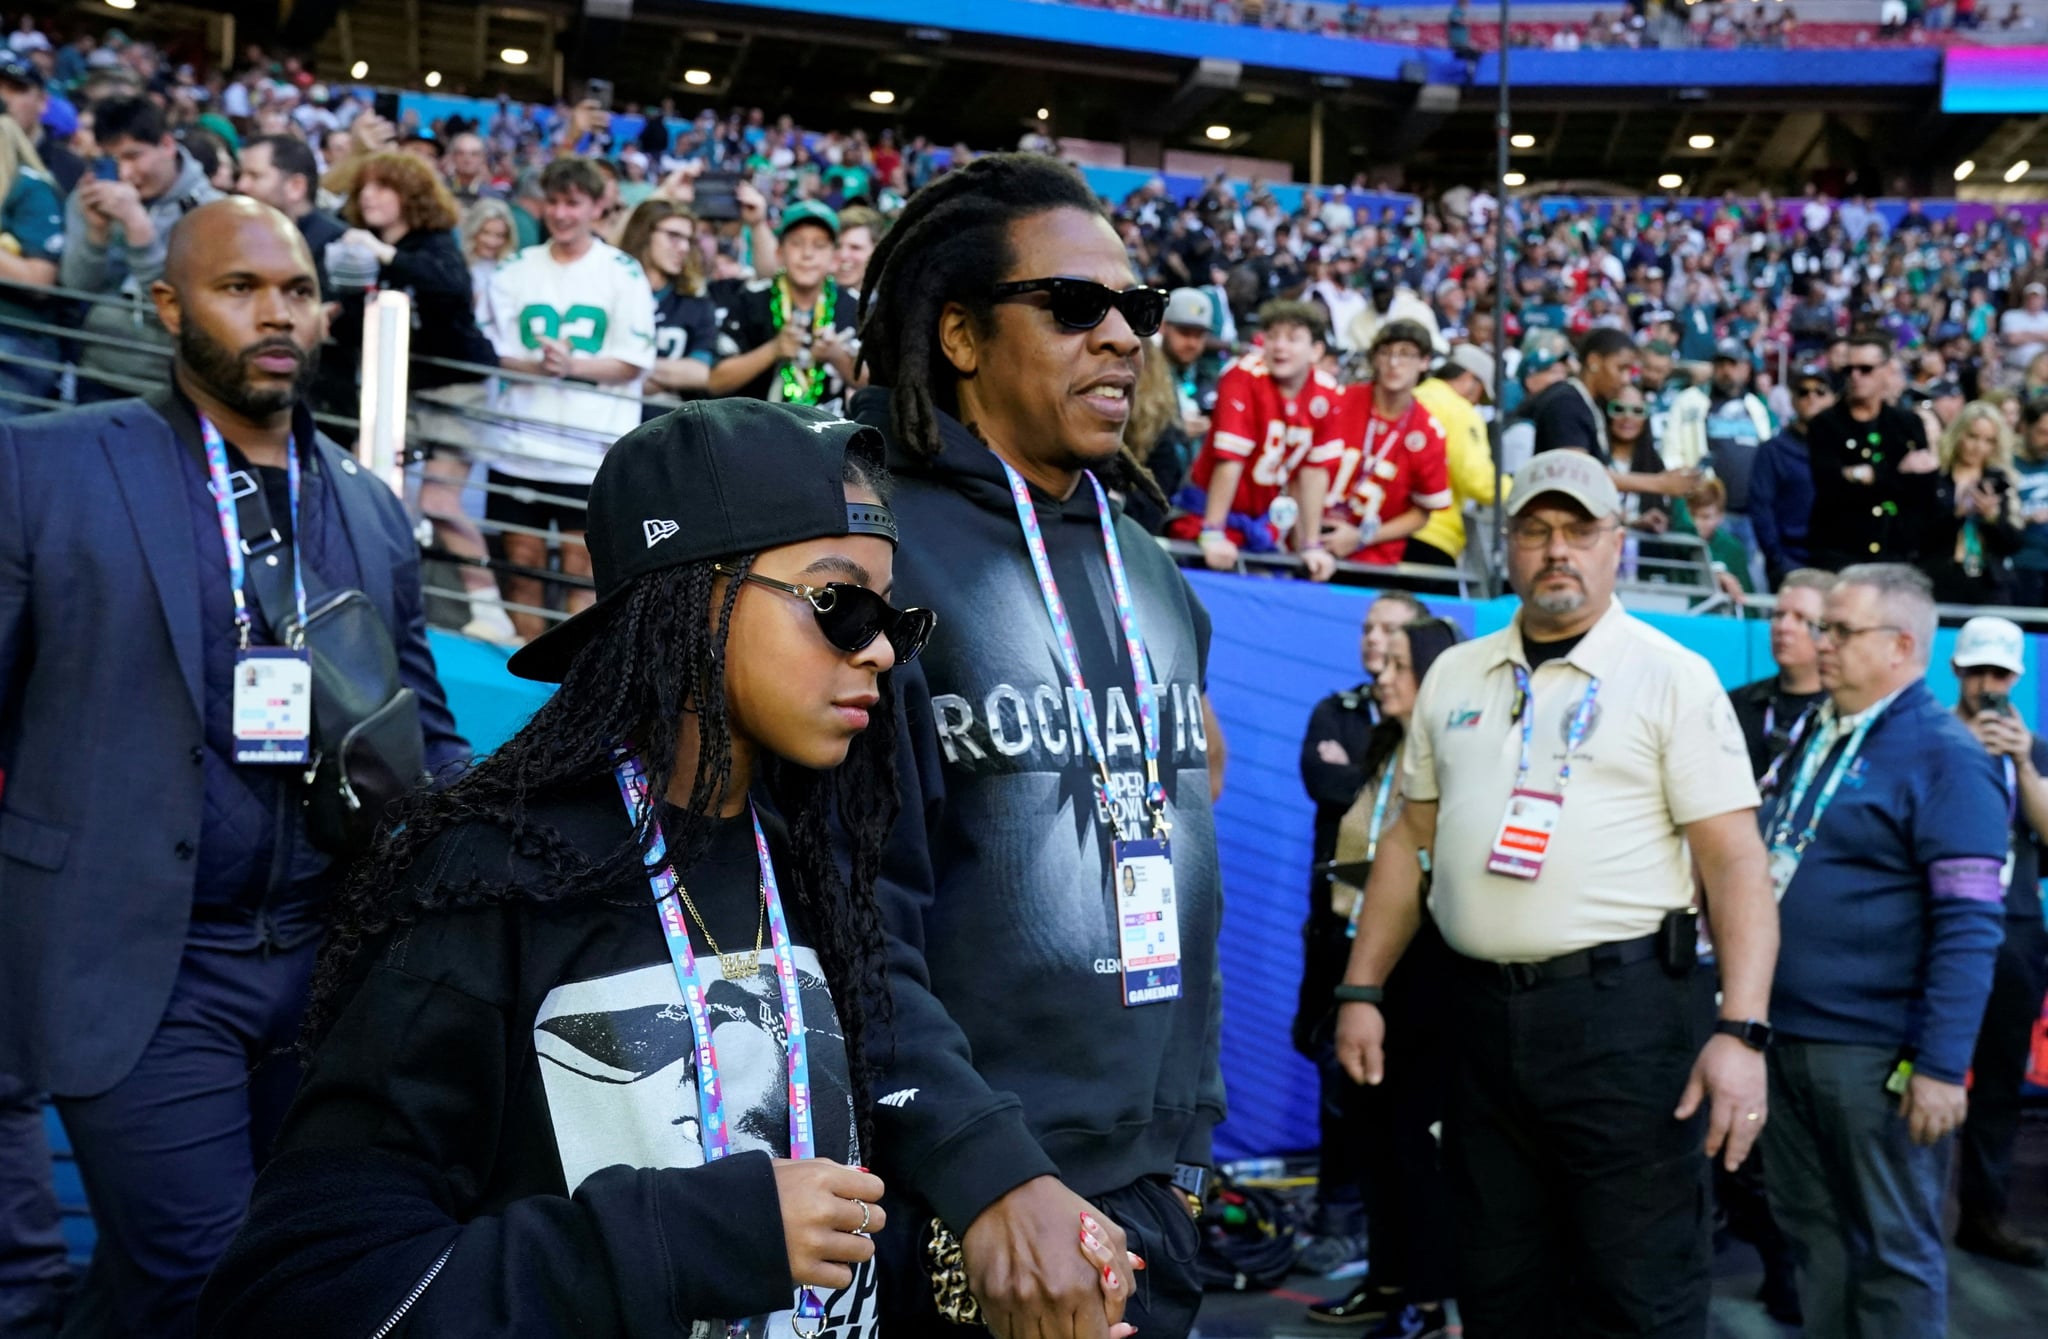 US rapper Jay-Z and his daughter Blue Ivy Carter arrives to Super Bowl LVII between the Kansas City Chiefs and the Philadelphia Eagles at State Farm Stadium in Glendale, Arizona, on February 12, 2023. (Photo by TIMOTHY A. CLARY / AFP) (Photo by TIMOTHY A. CLARY/AFP via Getty Images)